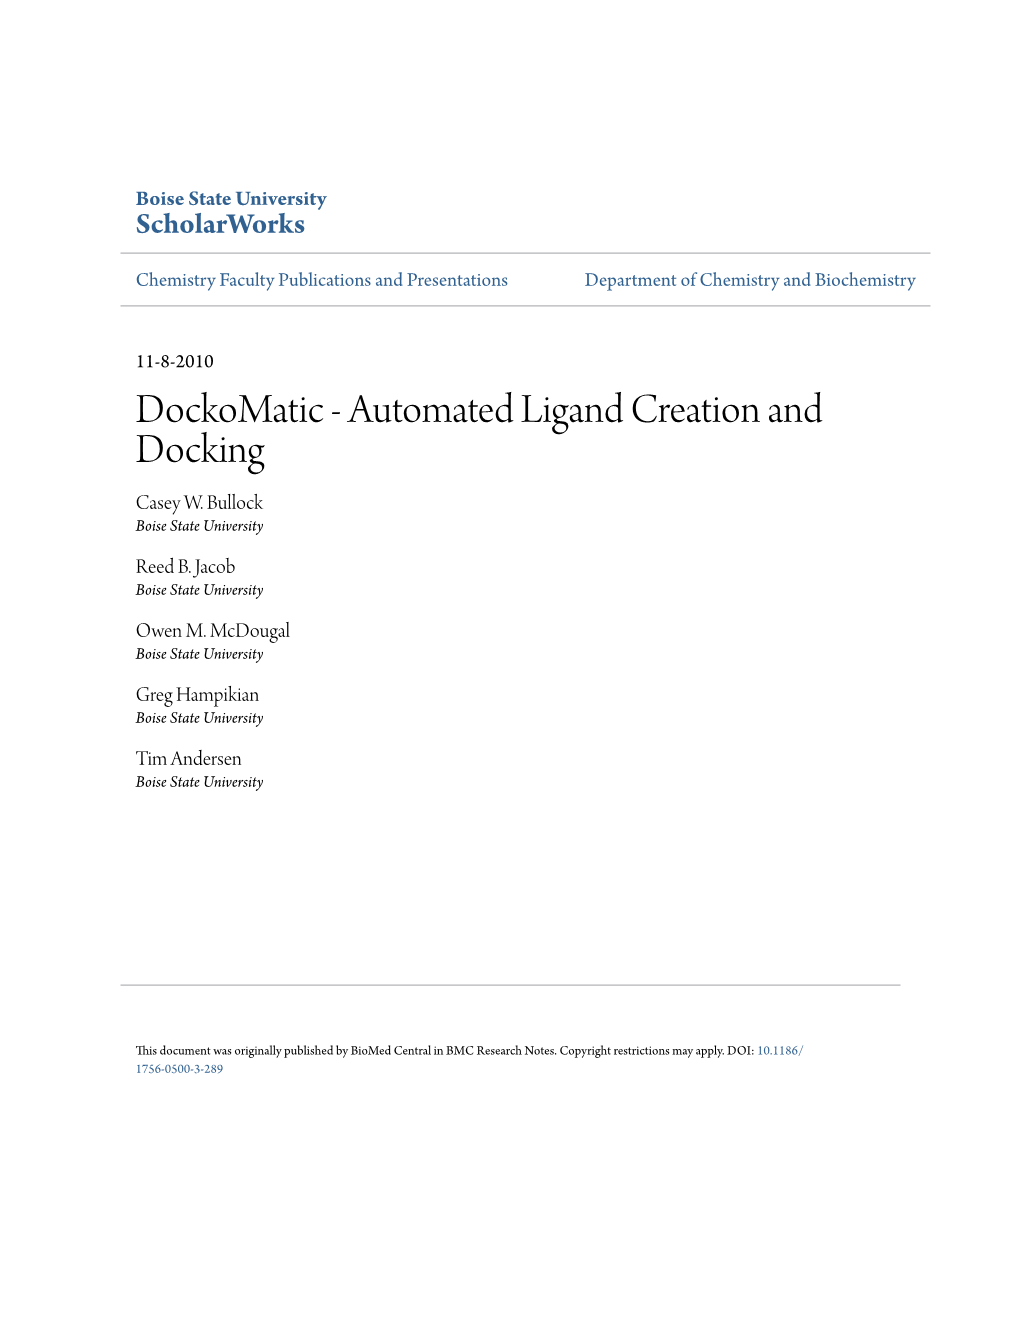 Dockomatic - Automated Ligand Creation and Docking Casey W